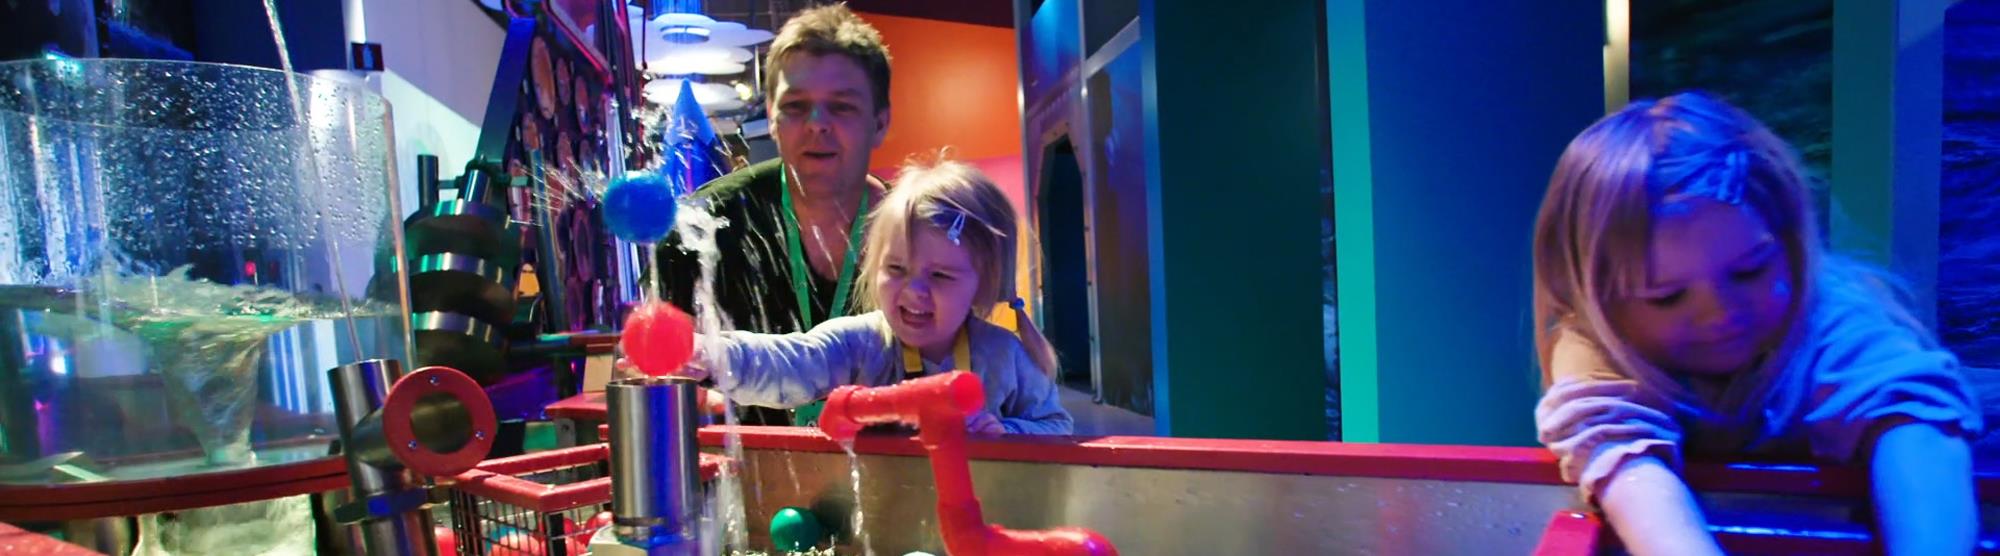 Top child friendly attractions